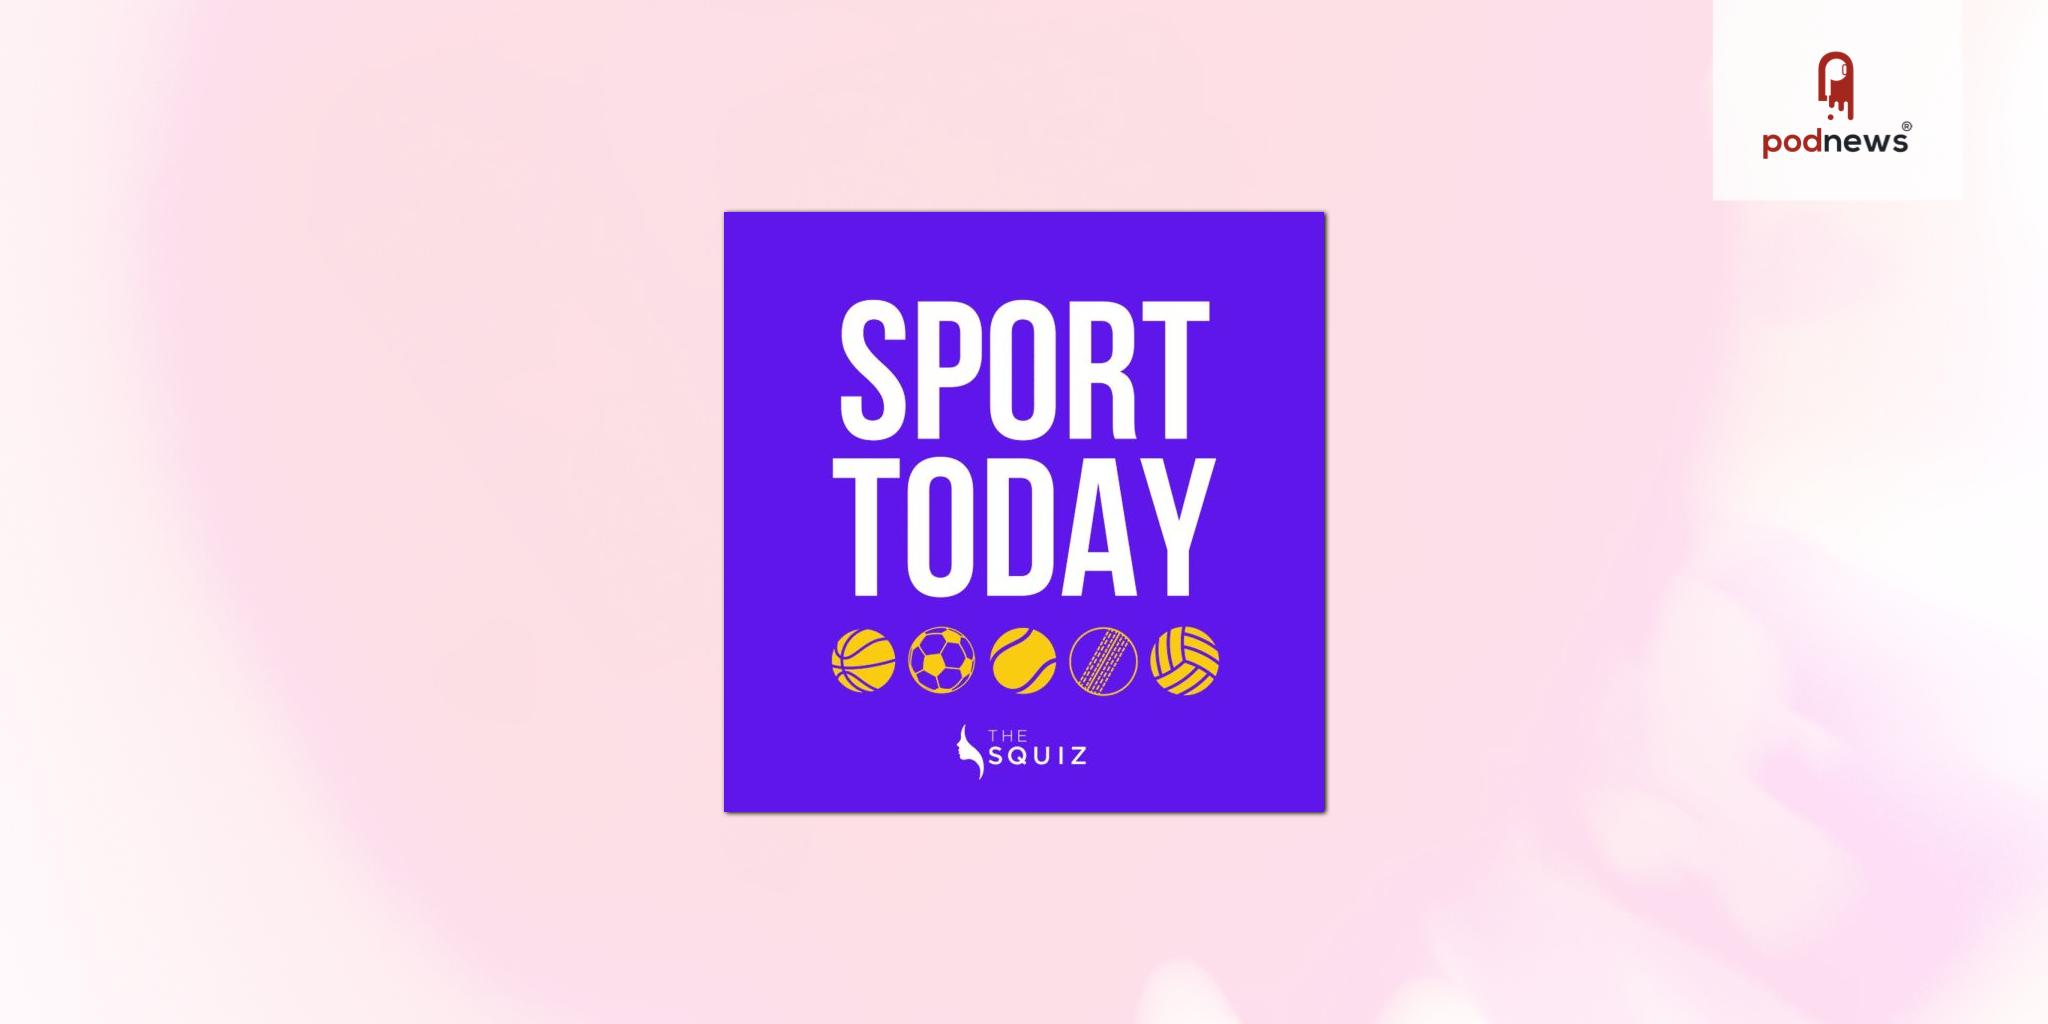 Sport Today is back in the game and ready to play as part of the Acast Creator Network